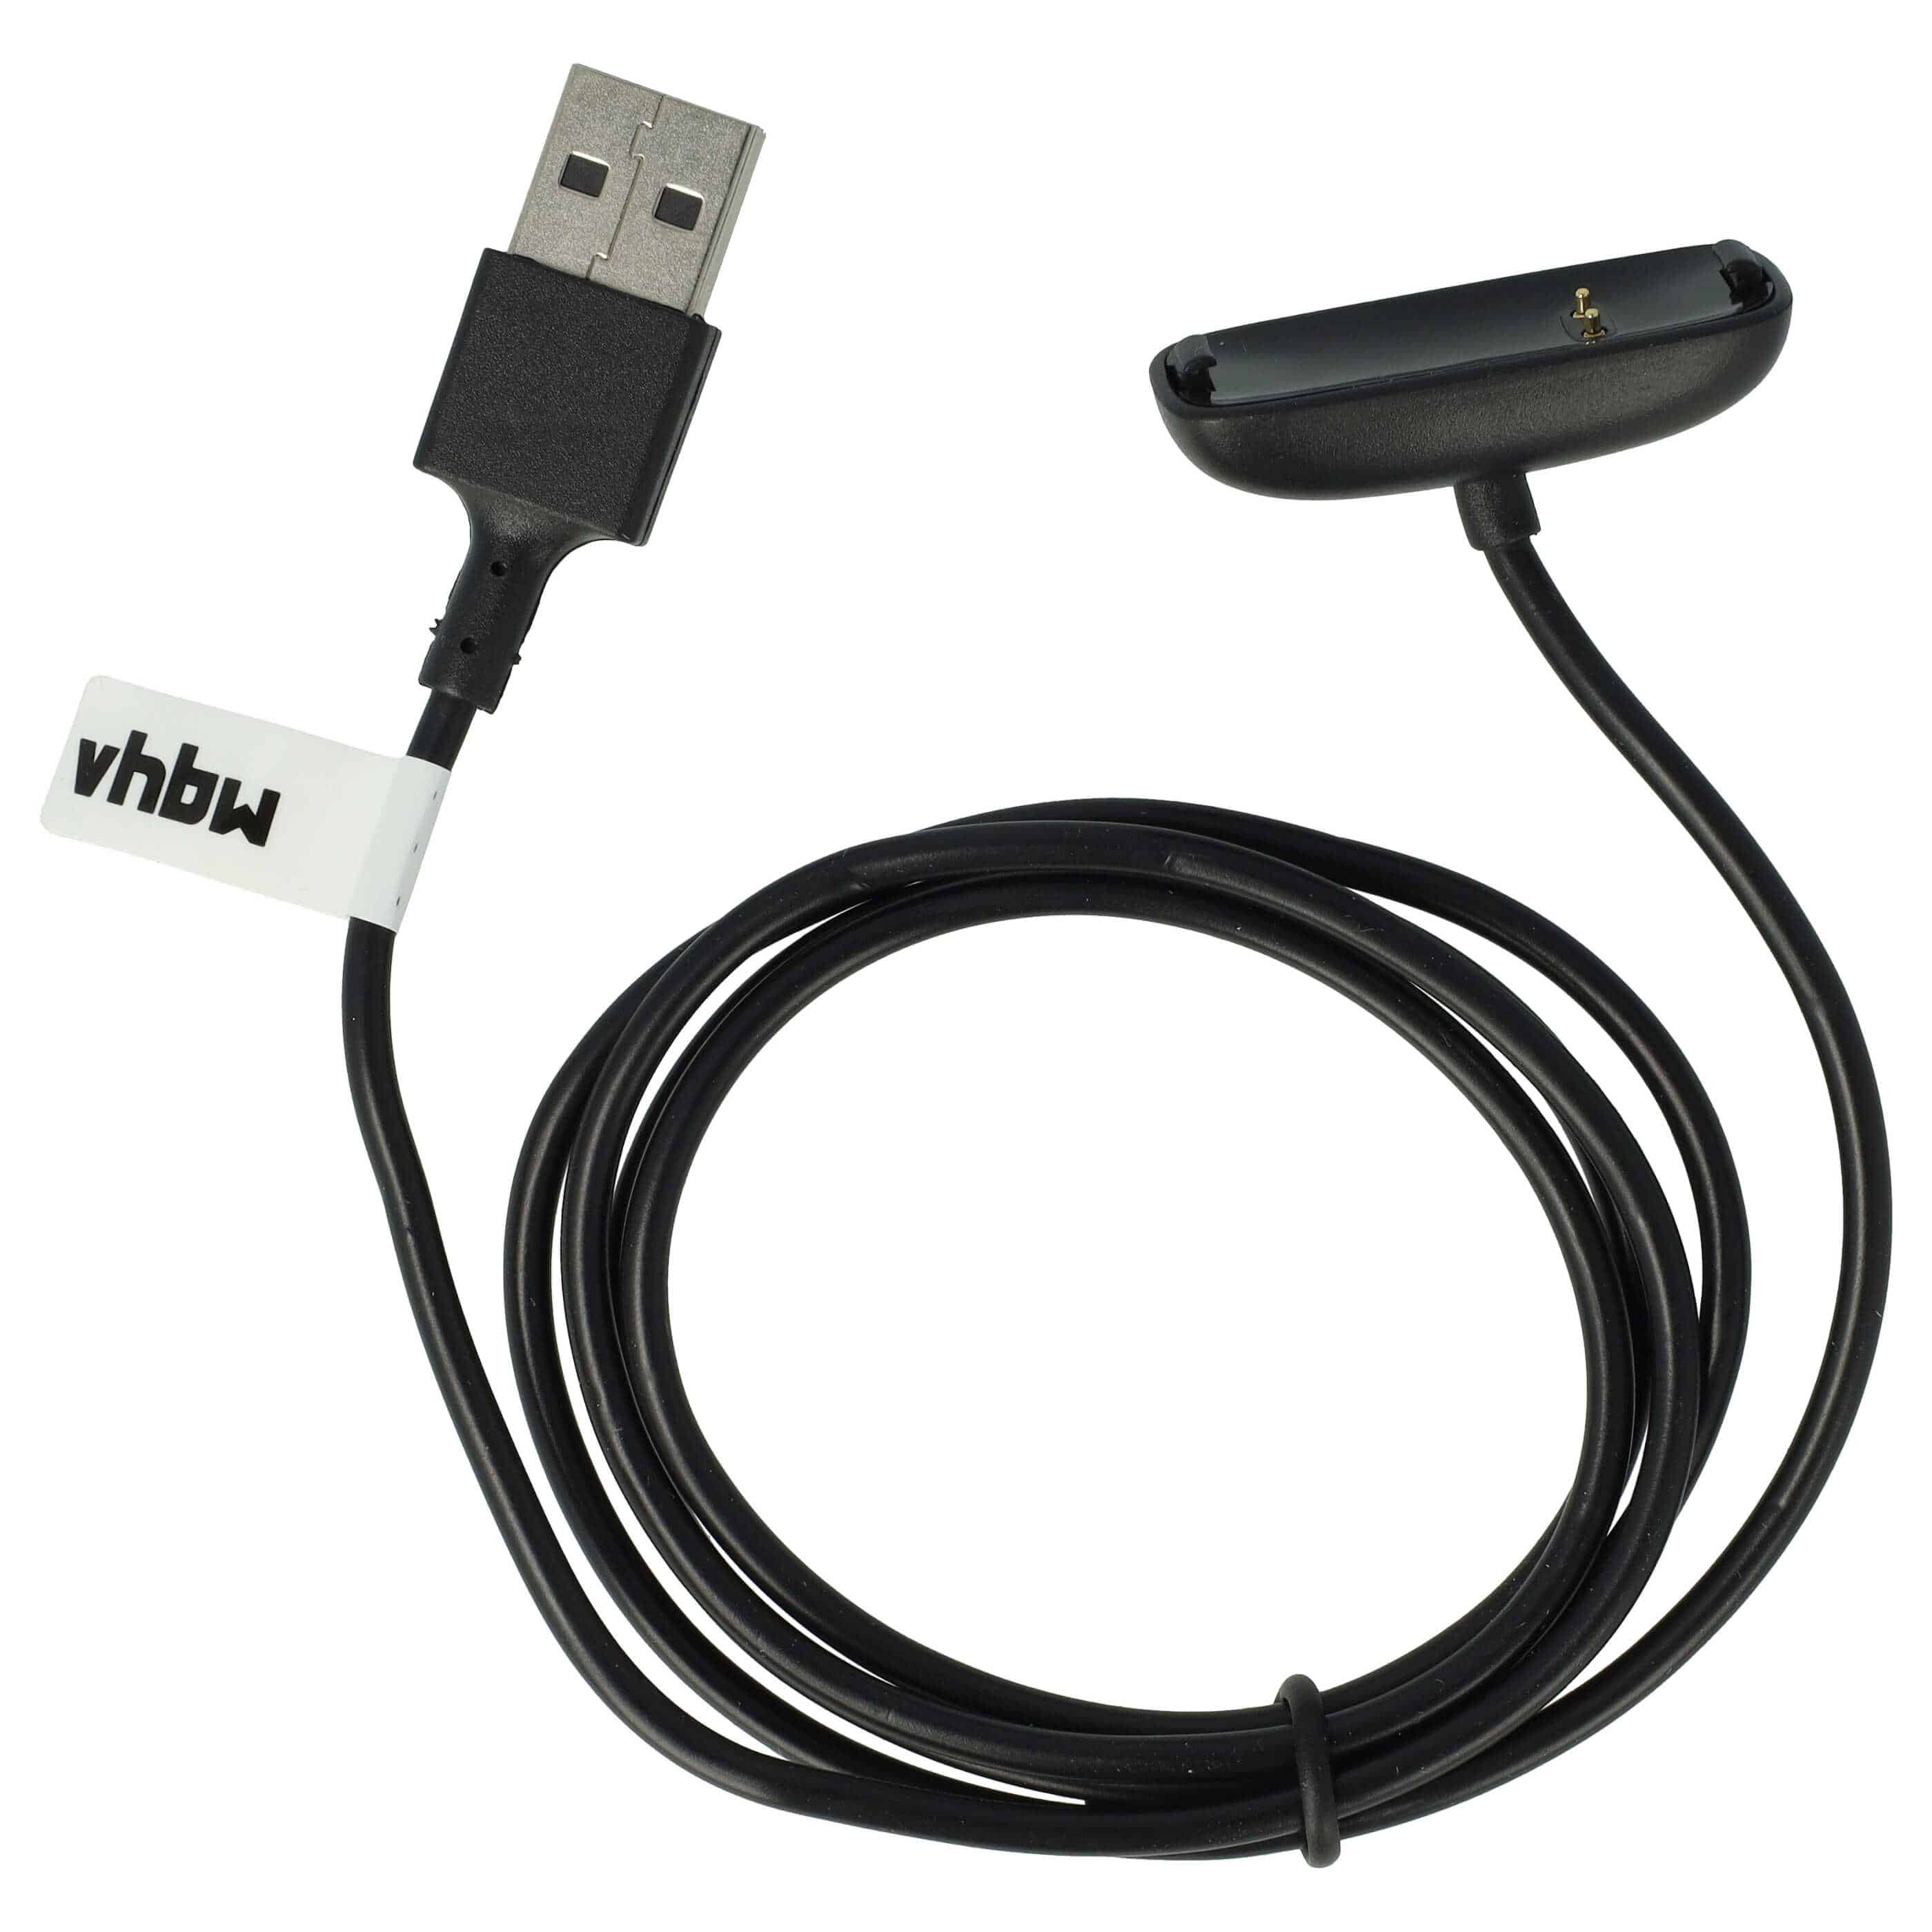 Charging Cable suitable for 3, 2 Fitbit Ace Fitness Tracker - USB A Cable, 100cm, black